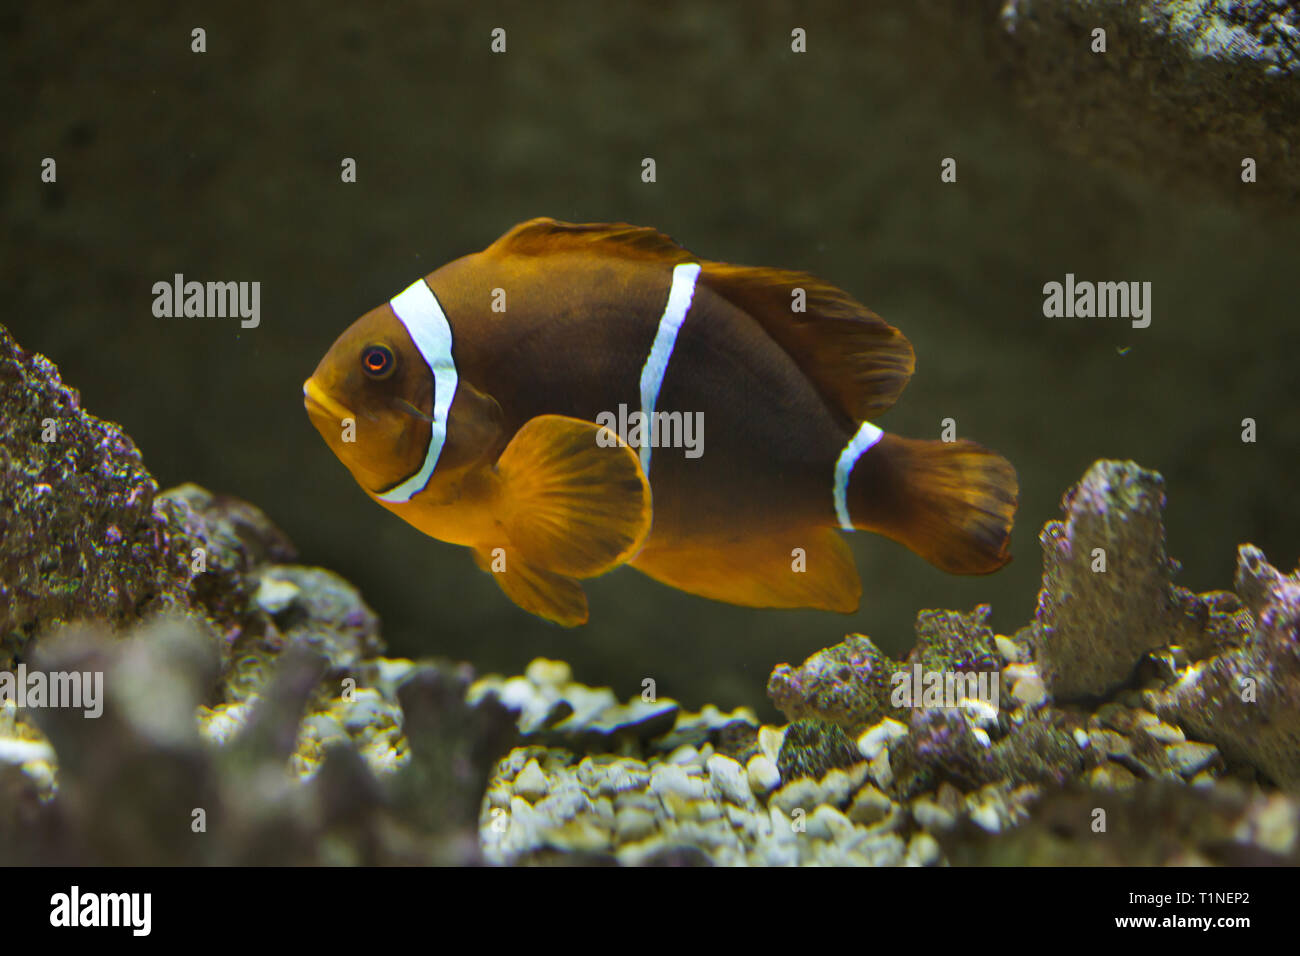 Spine-cheeked anemonefish (Premnas biaculeatus), also known as the maroon clownfish. Stock Photo